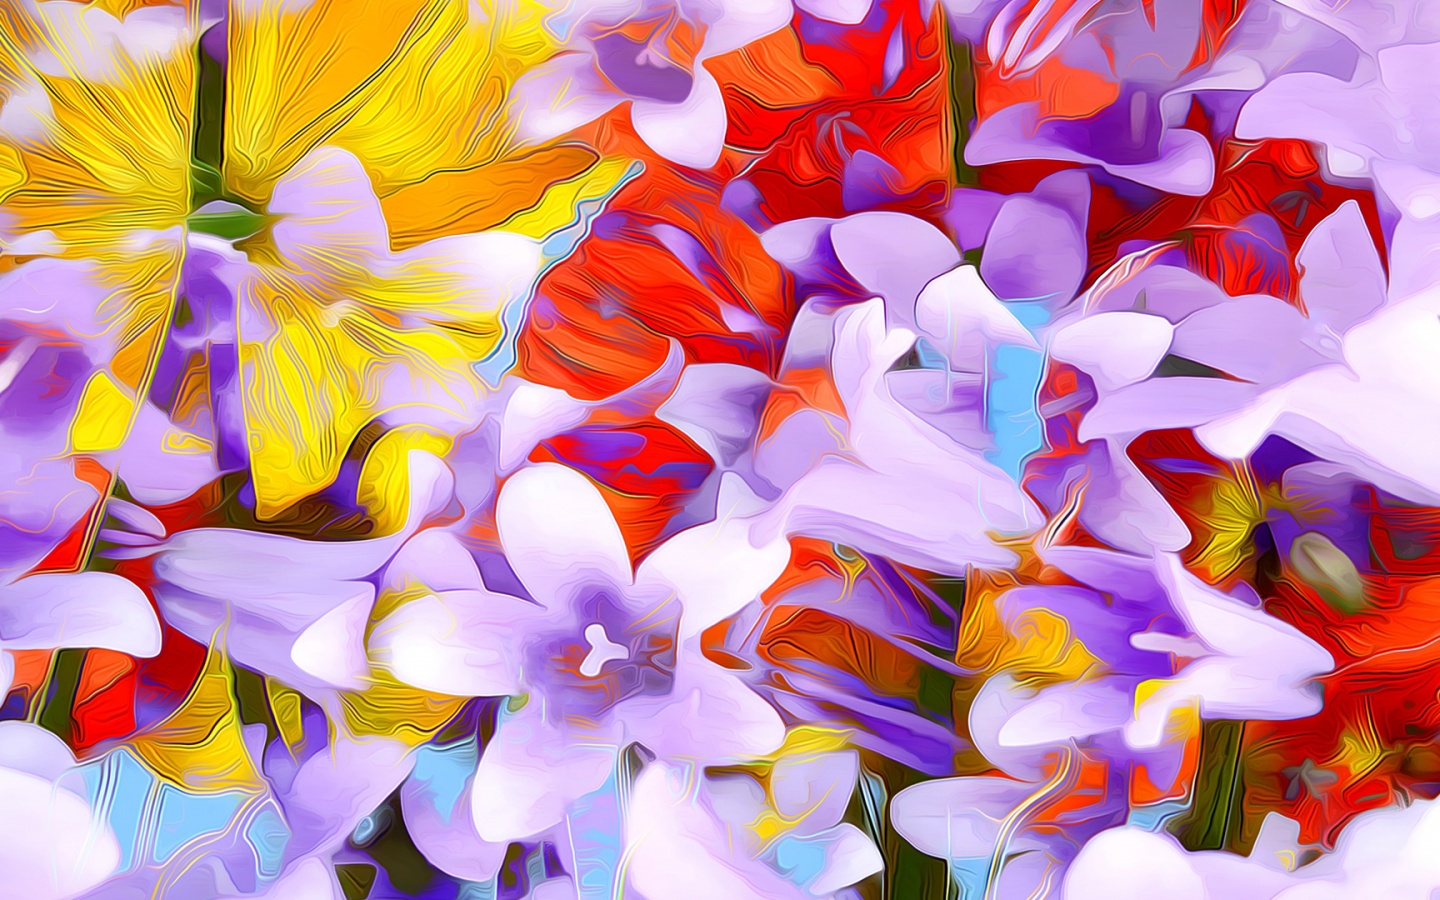 Flowers Art Abstraction (click to view) HD Wallpapers in 1440x900 Resolution